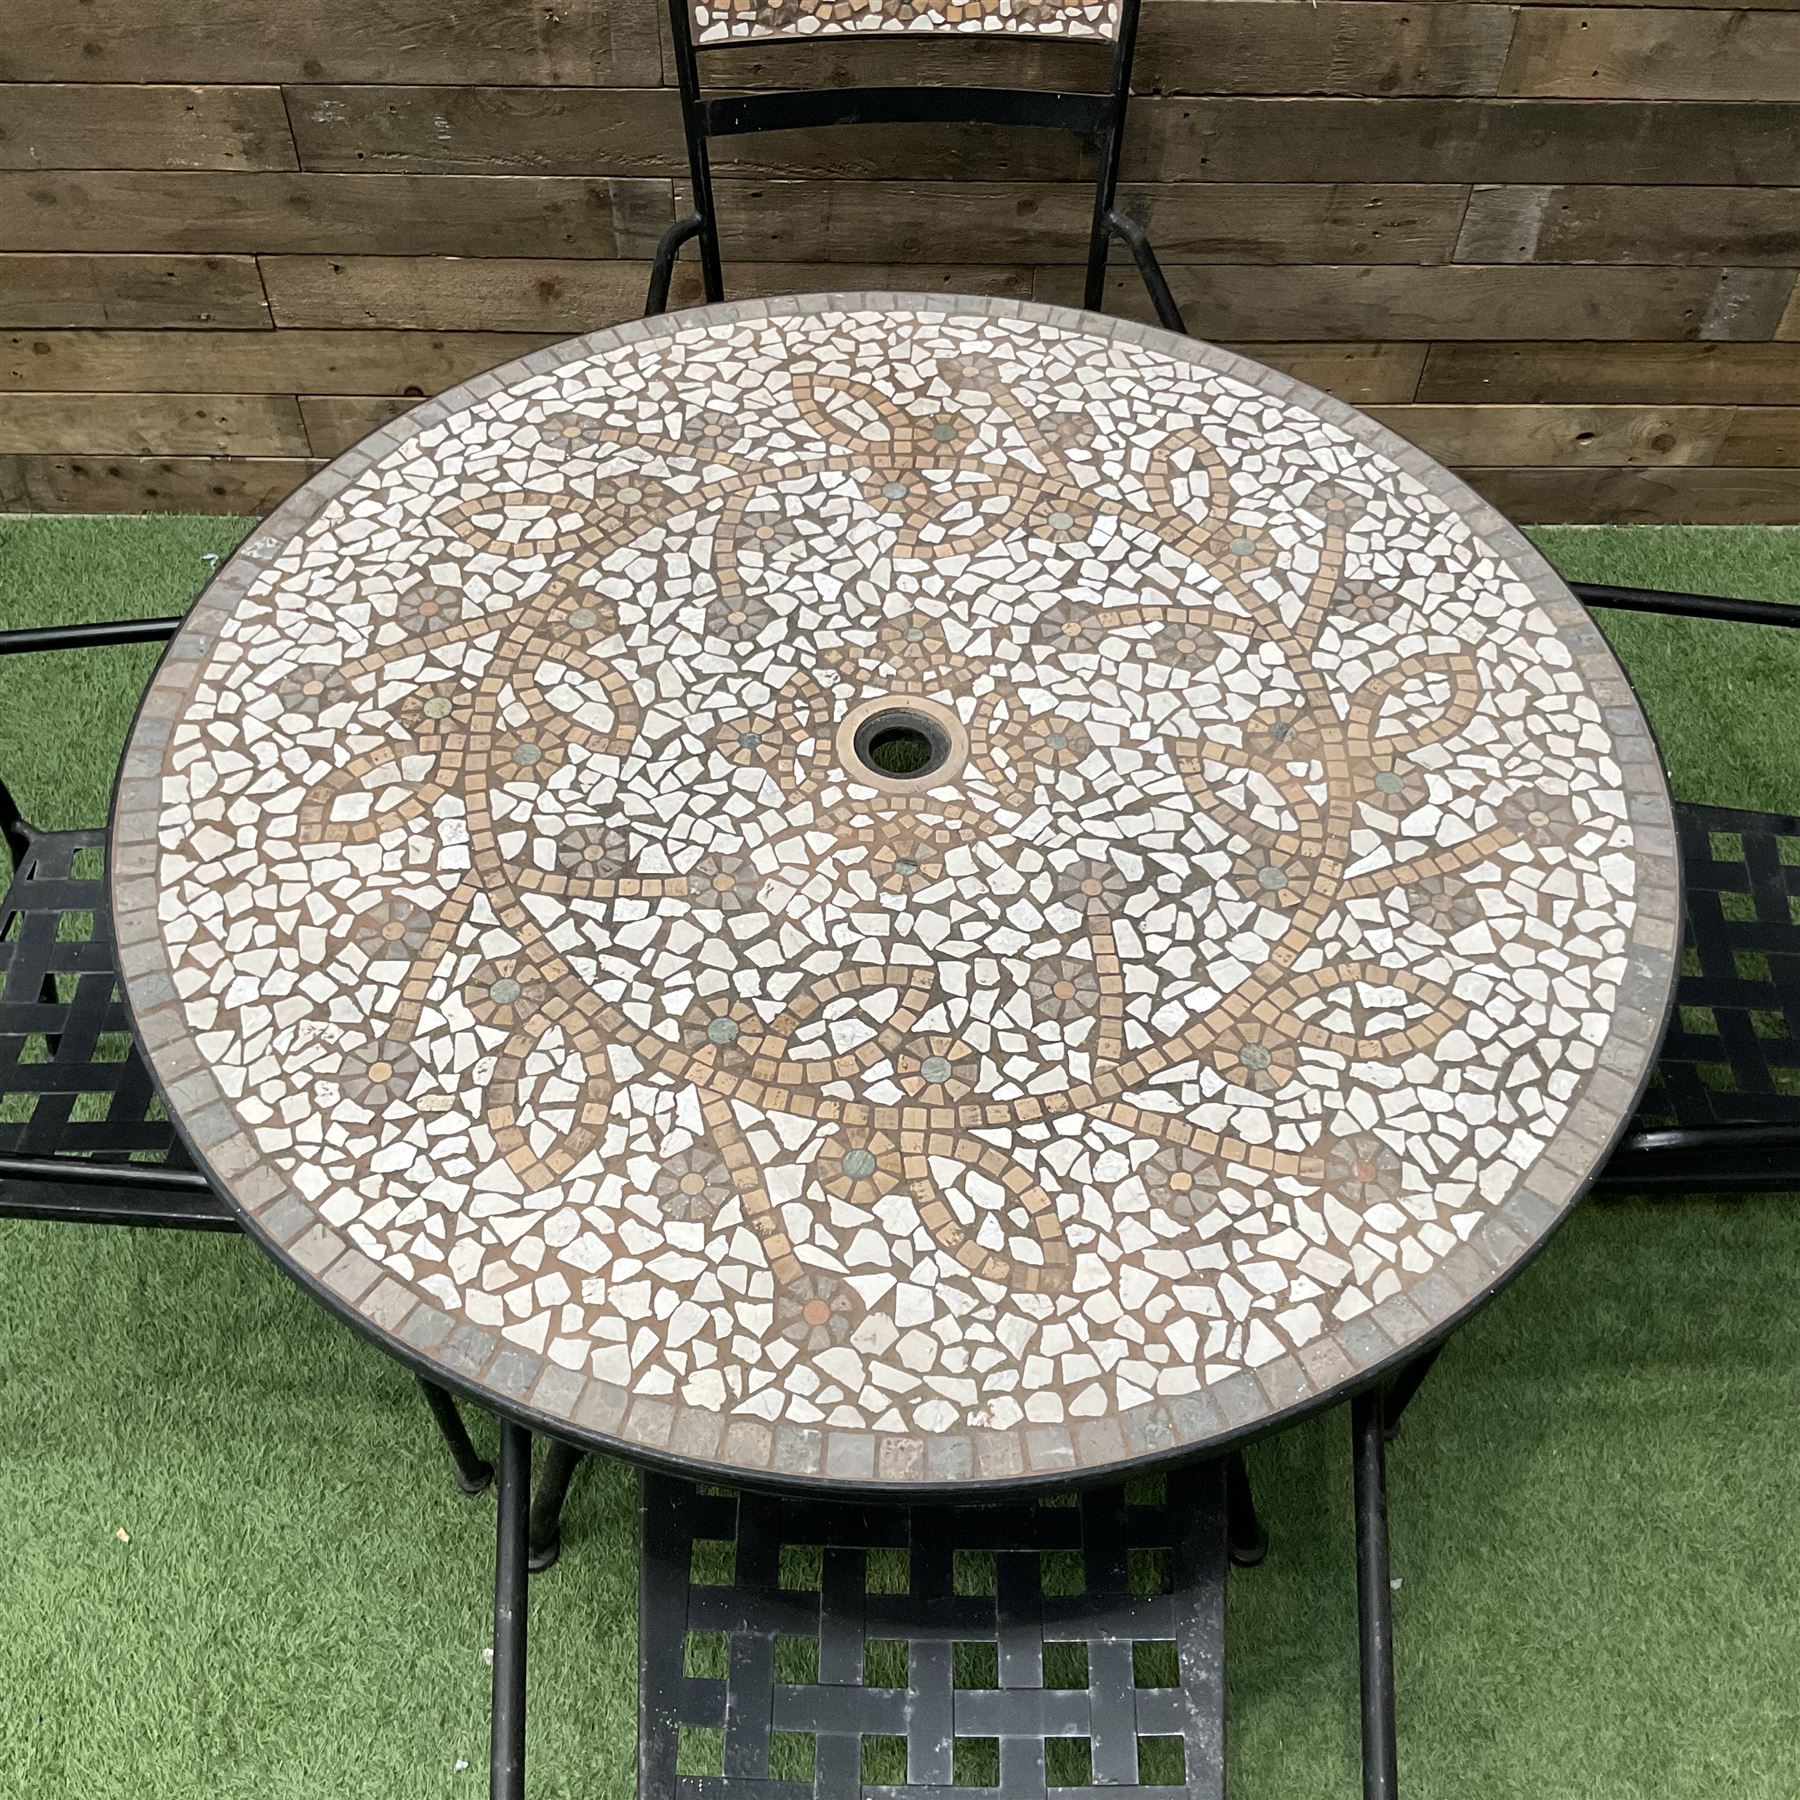 Mosaic and black metal circular garden table and four chairs - Image 4 of 6